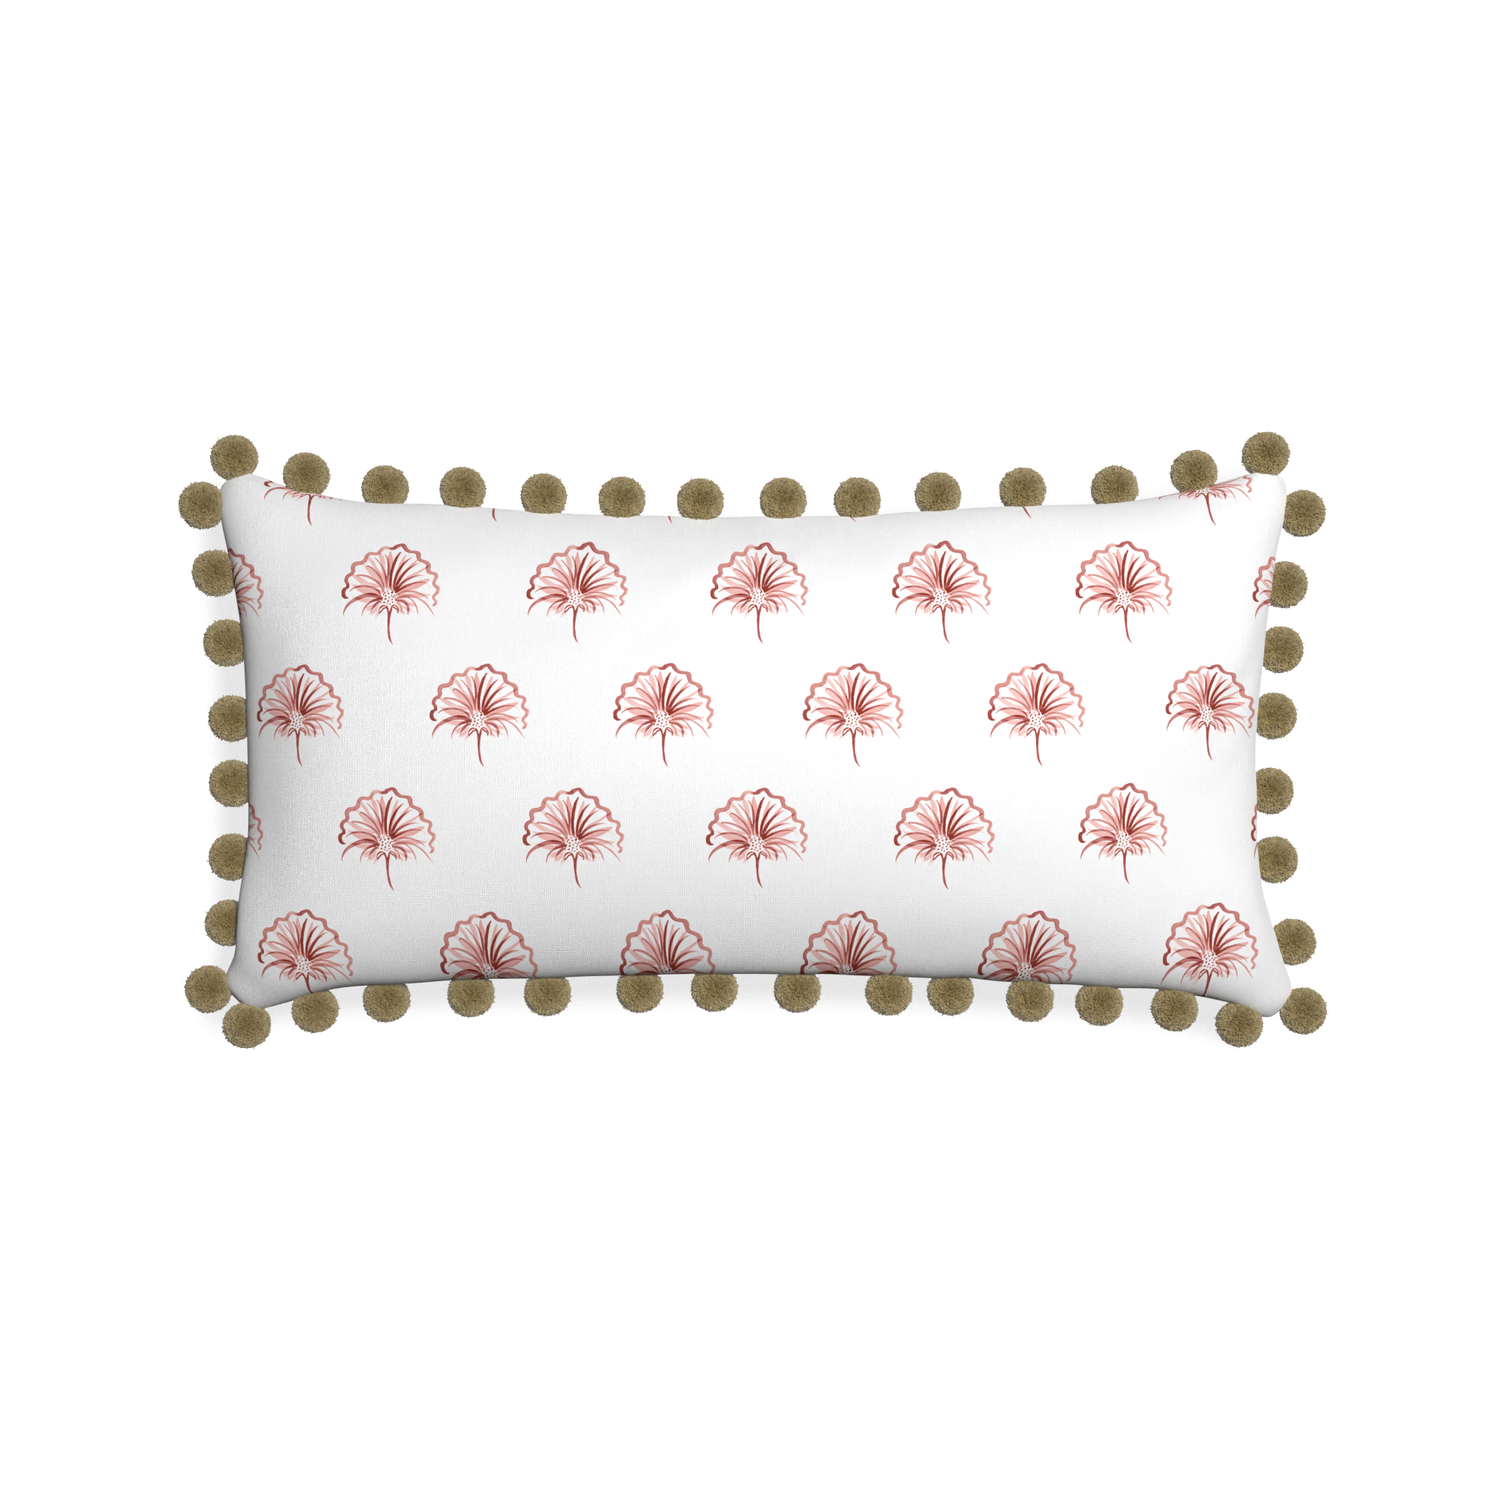 Midi-lumbar penelope rose custom floral pinkpillow with olive pom pom on white background